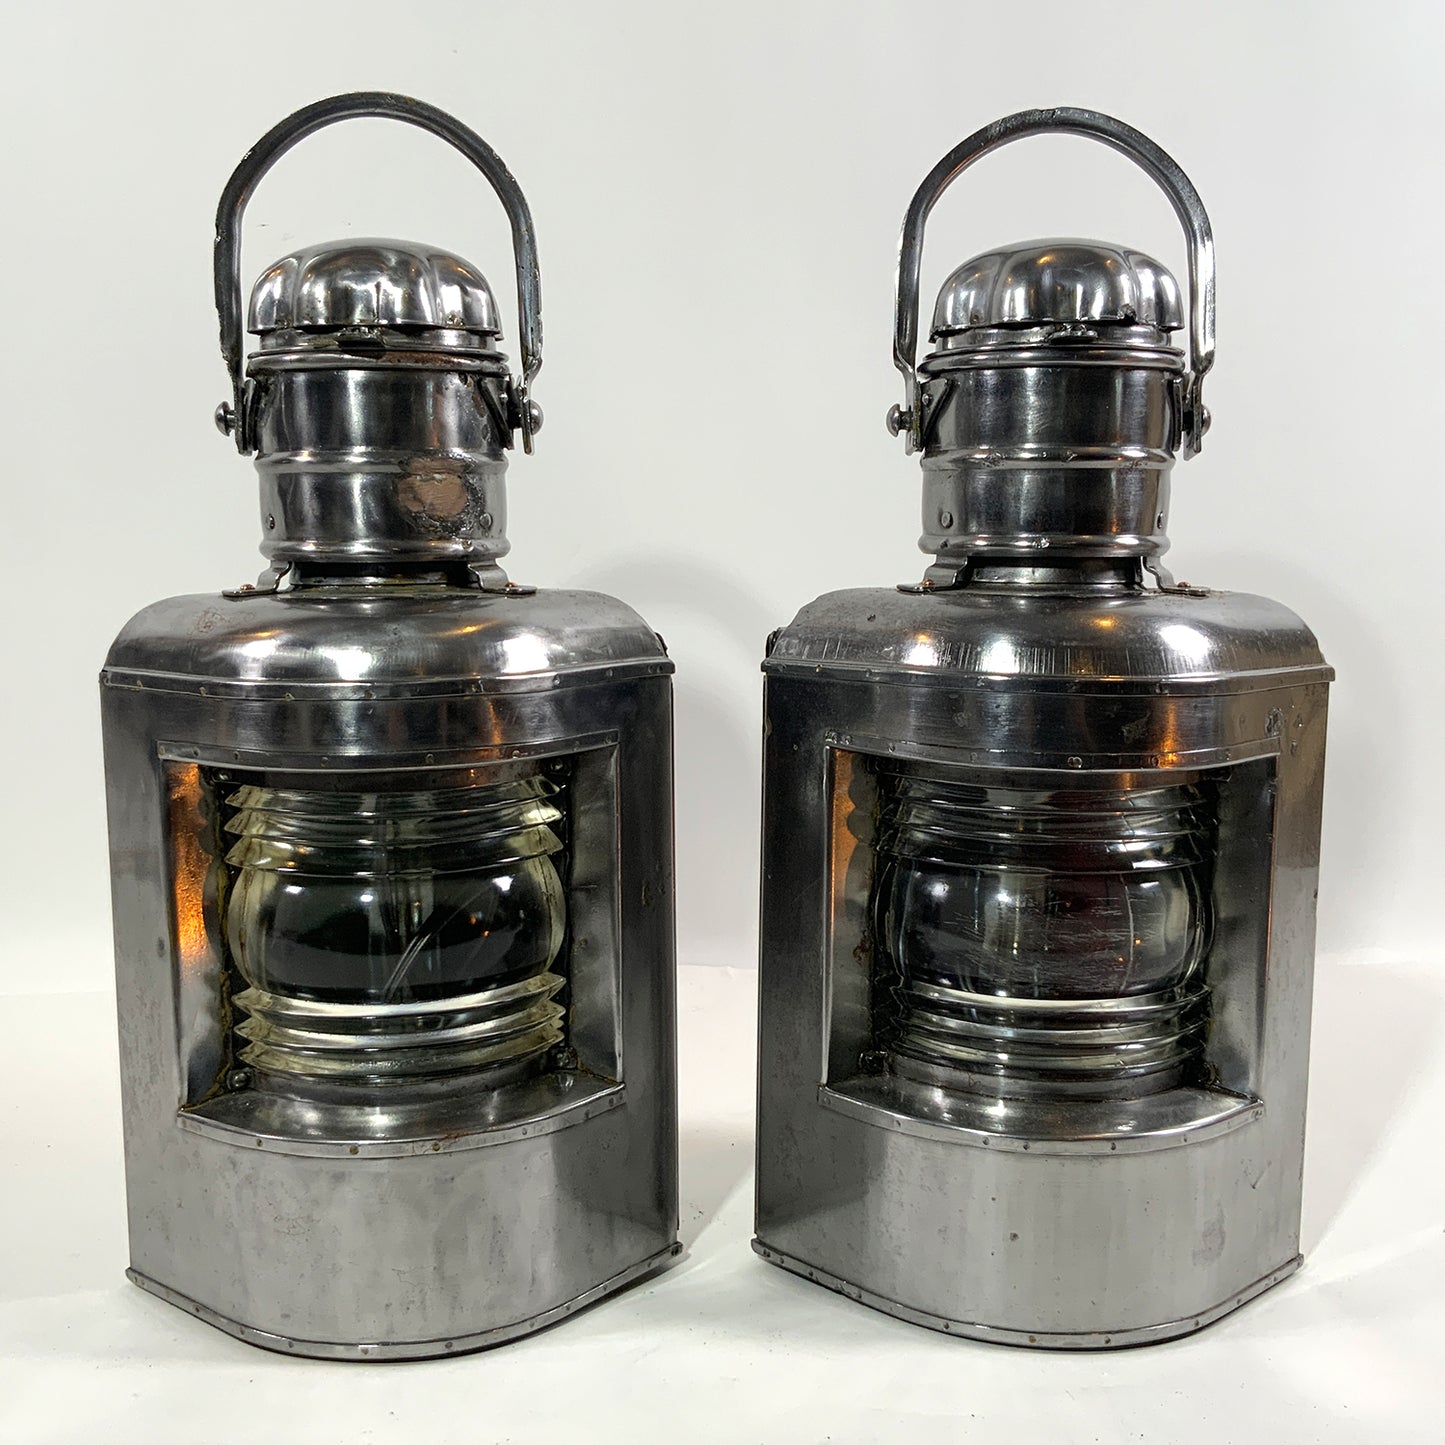 Polished Steel Port And Starboard Ship Lanterns - Lannan Gallery